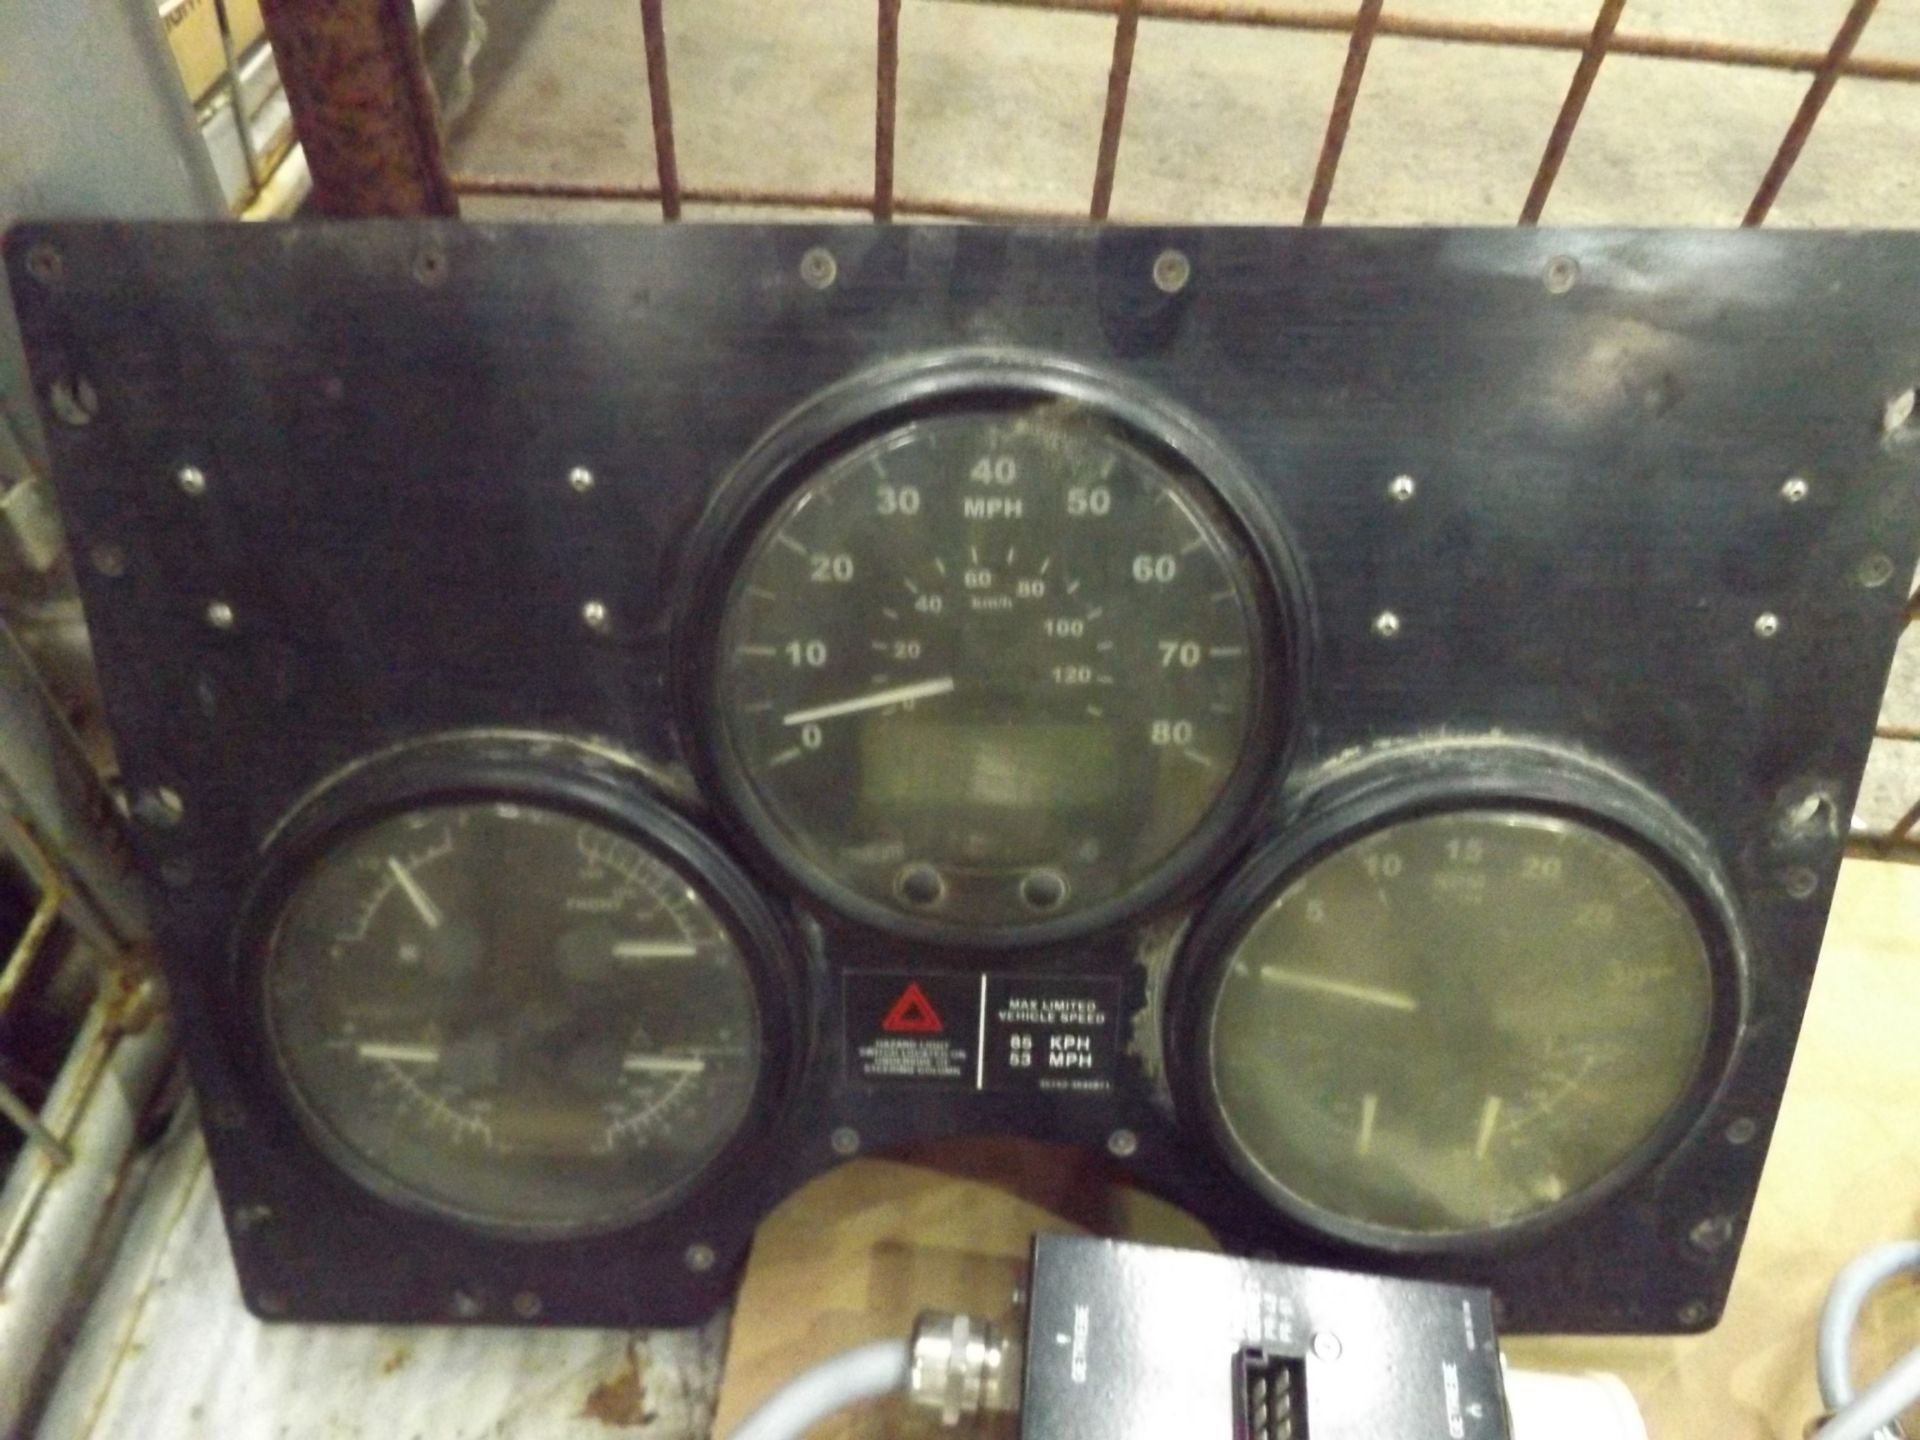 Mixed Stillage of Test Set, Test Adaptors and Instrument Panel - Image 10 of 10